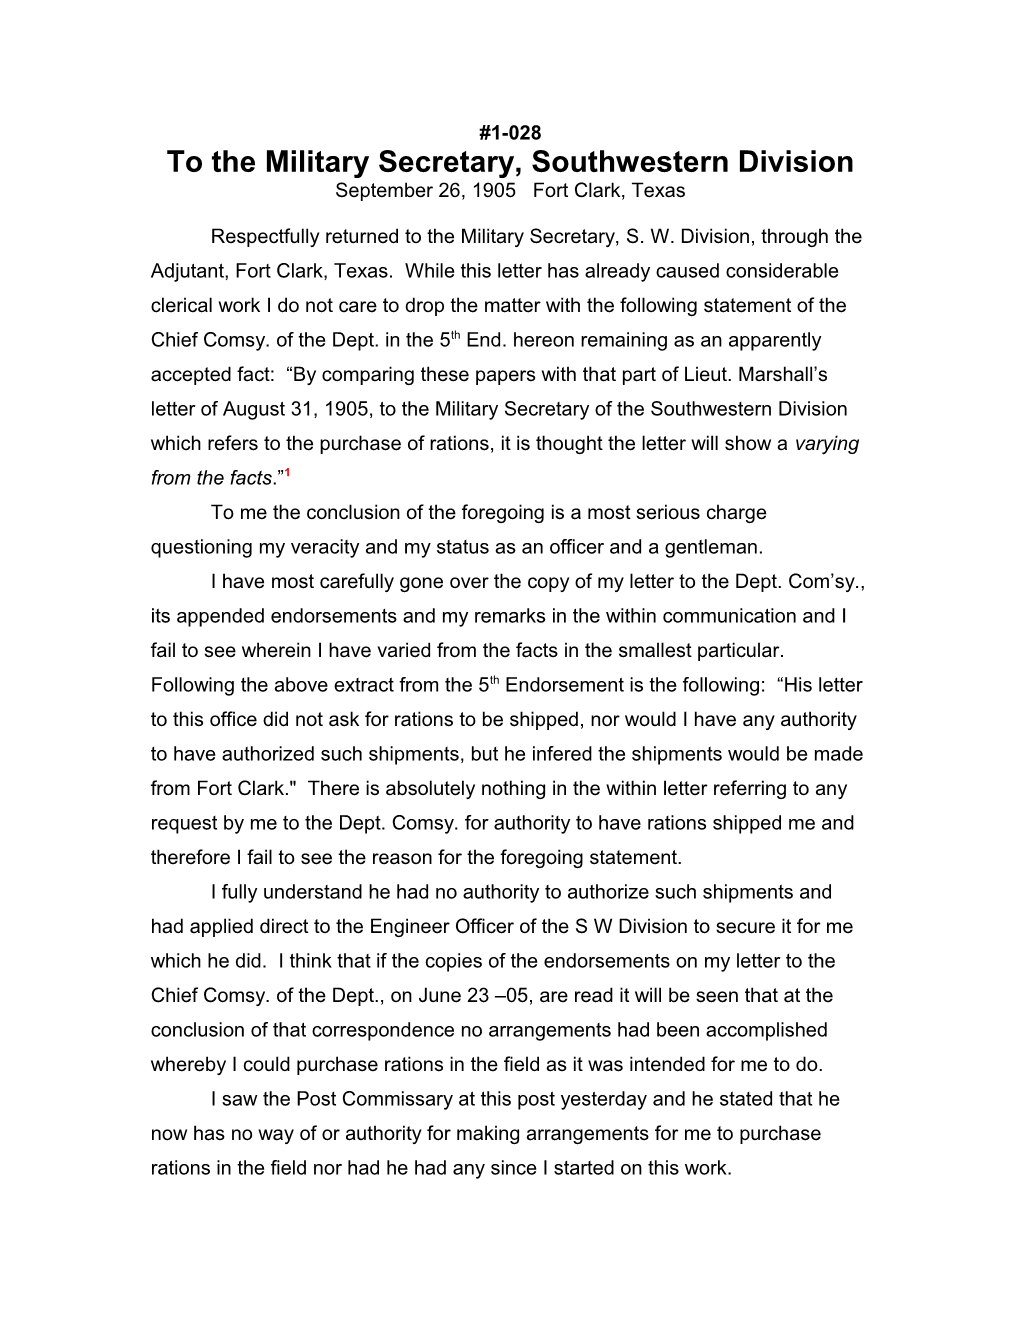 To the Military Secretary, Southwestern Division